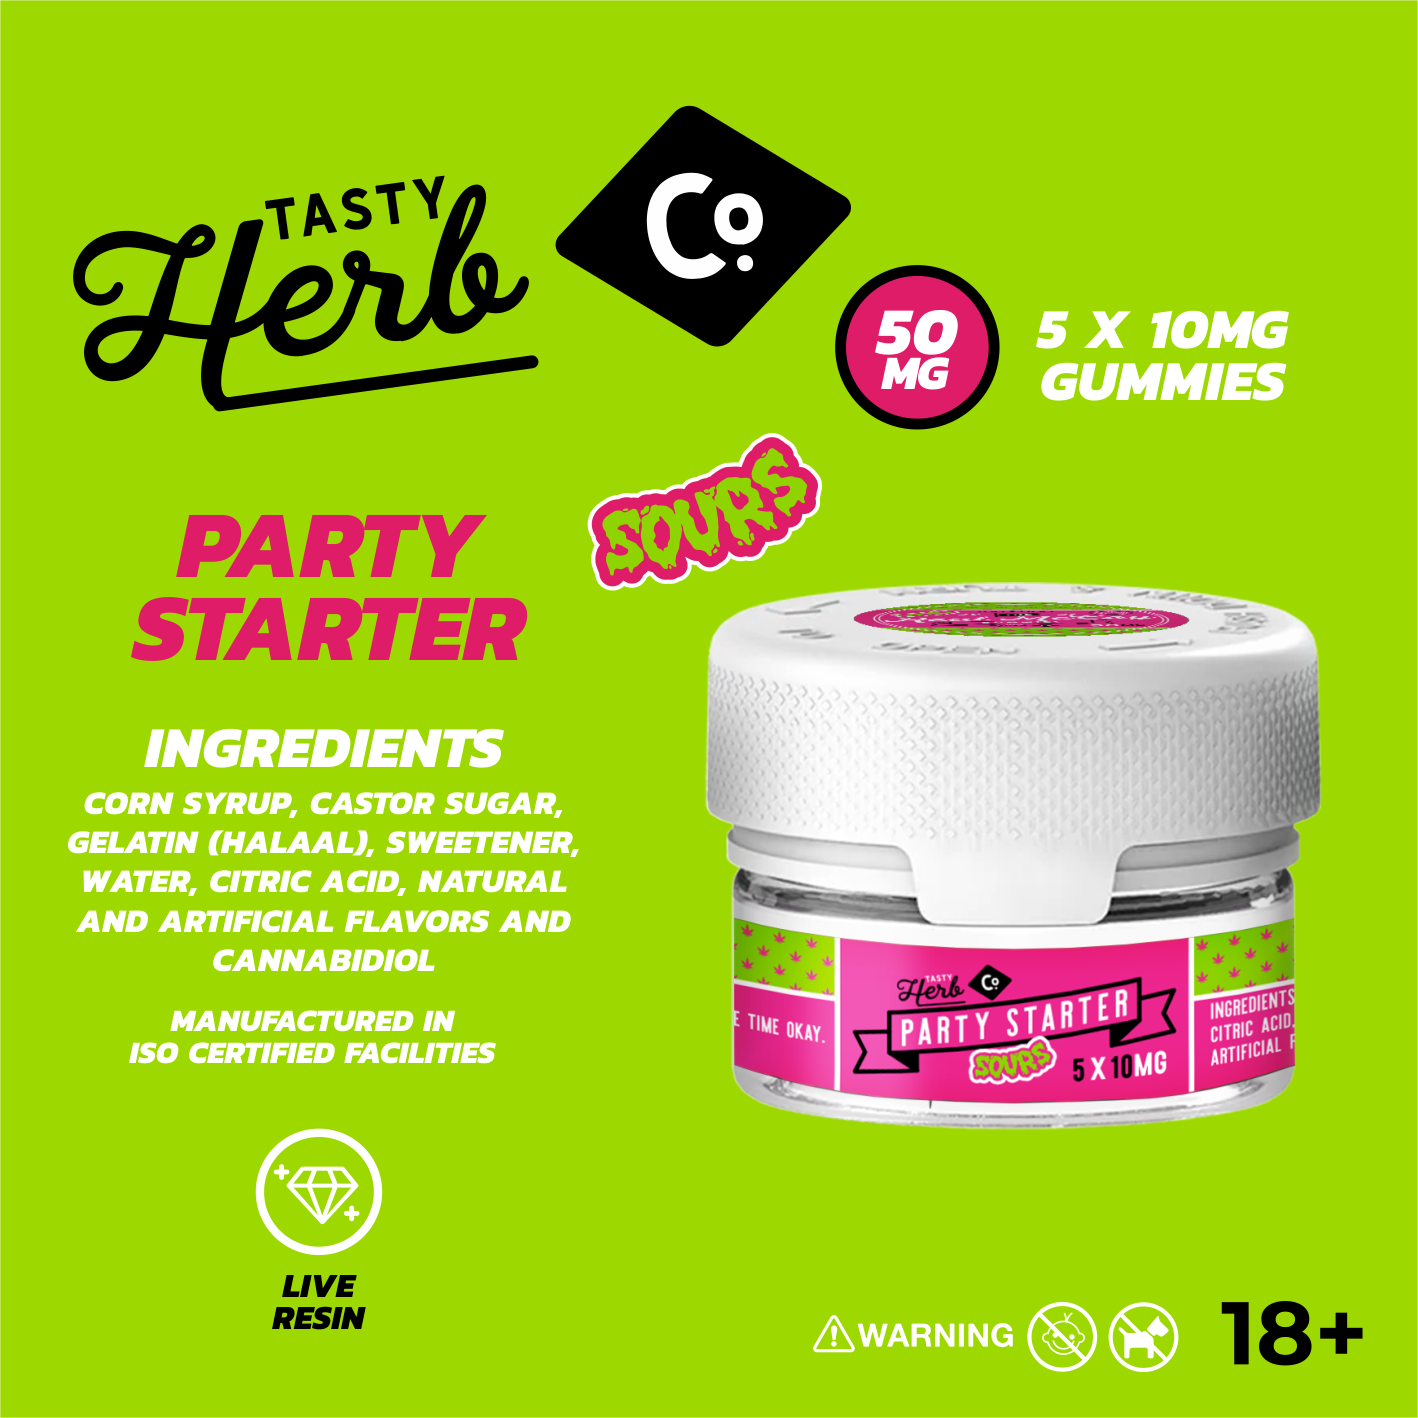 PARTY STARTER SOURS - 50MG (5 X 10MG)